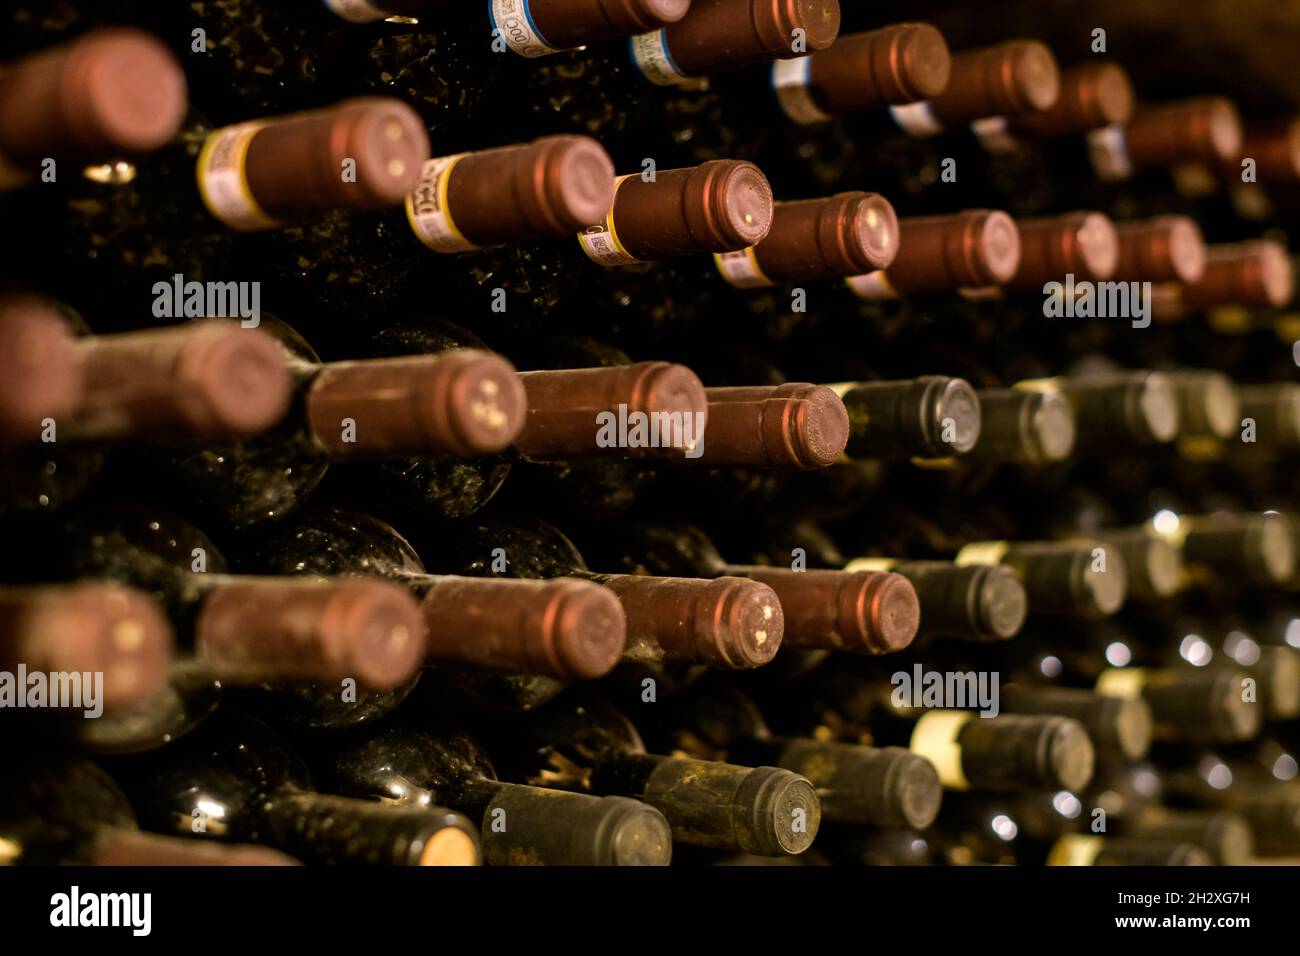 Close up on rows of dusty red wine bottles maturing on the rack in a cellar on a winery in a viticulture, oenology and wine production concept in a re Stock Photo